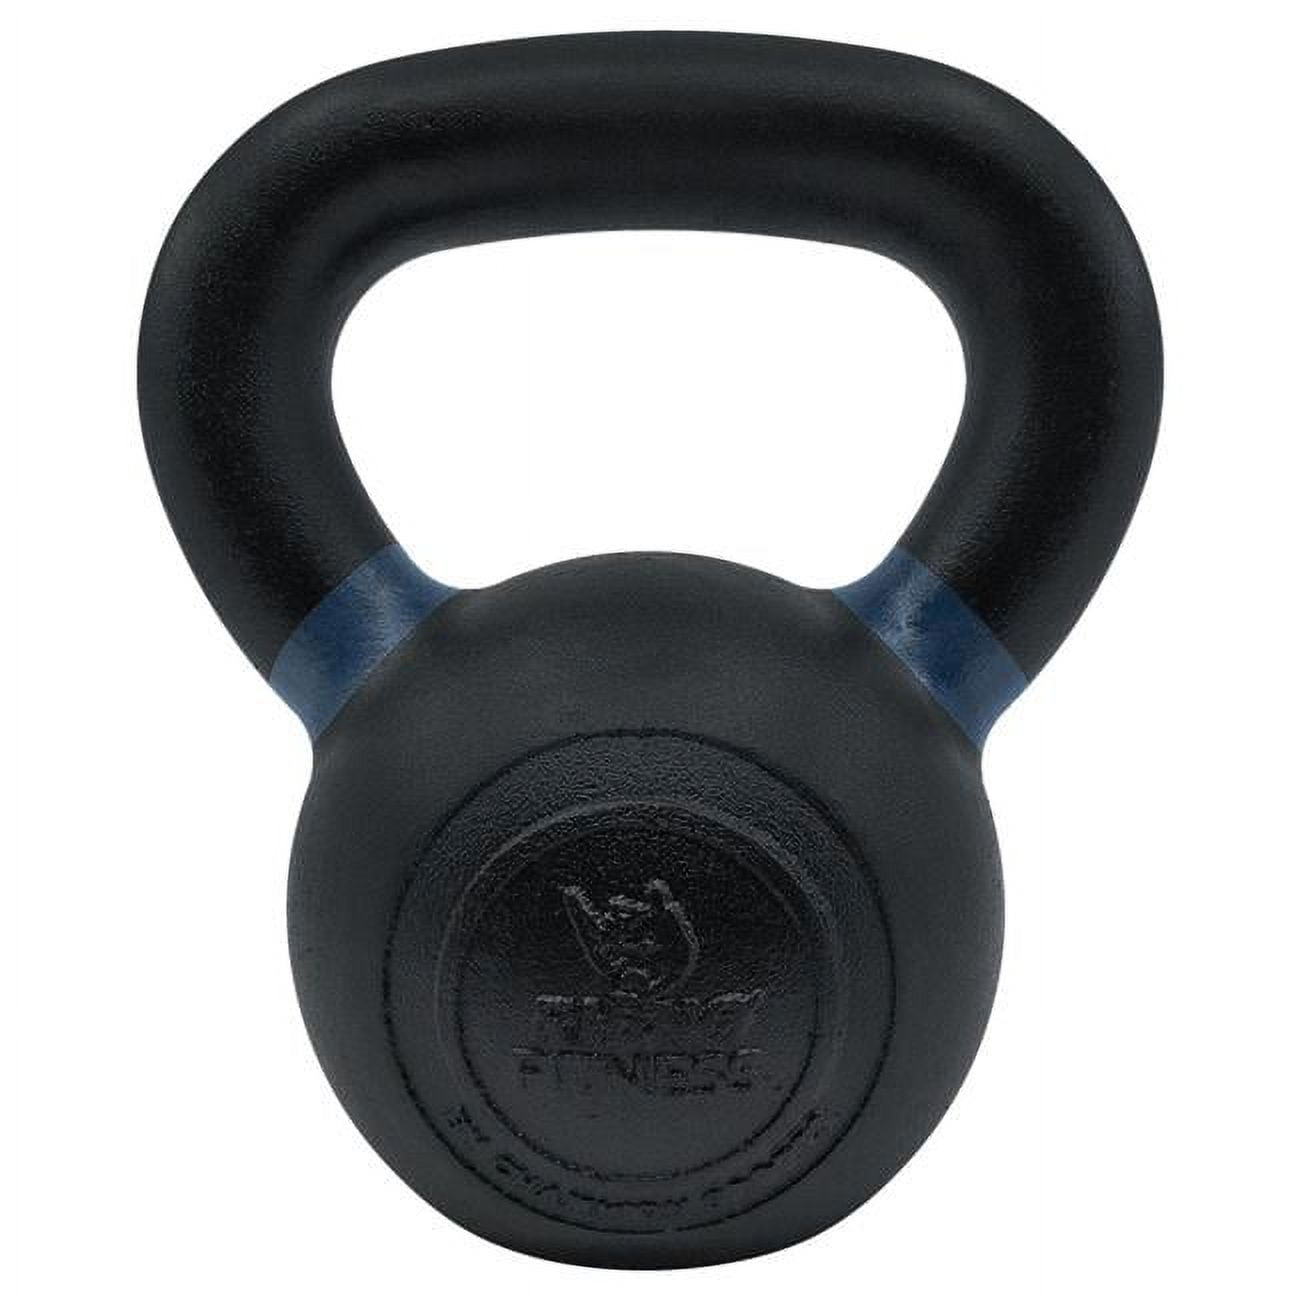 Picture of Champion Sports PCK25 7 x 5 x 8 in. 25 lbs Iron Kettlebell with Dark Blue Handles